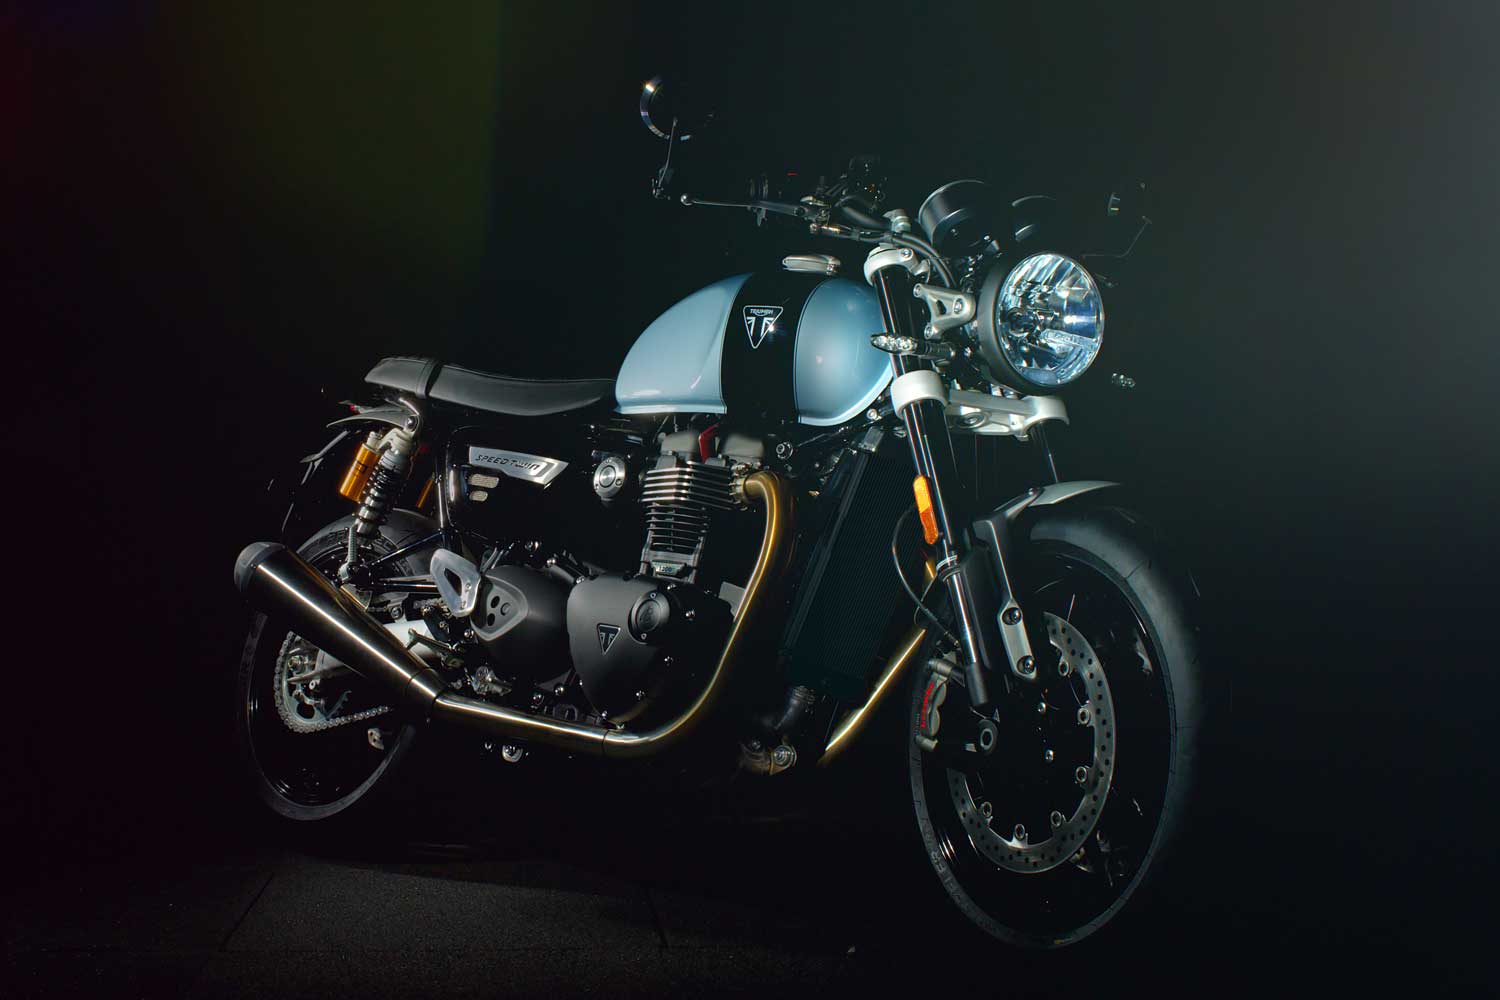 The new Triumph Speed Twin